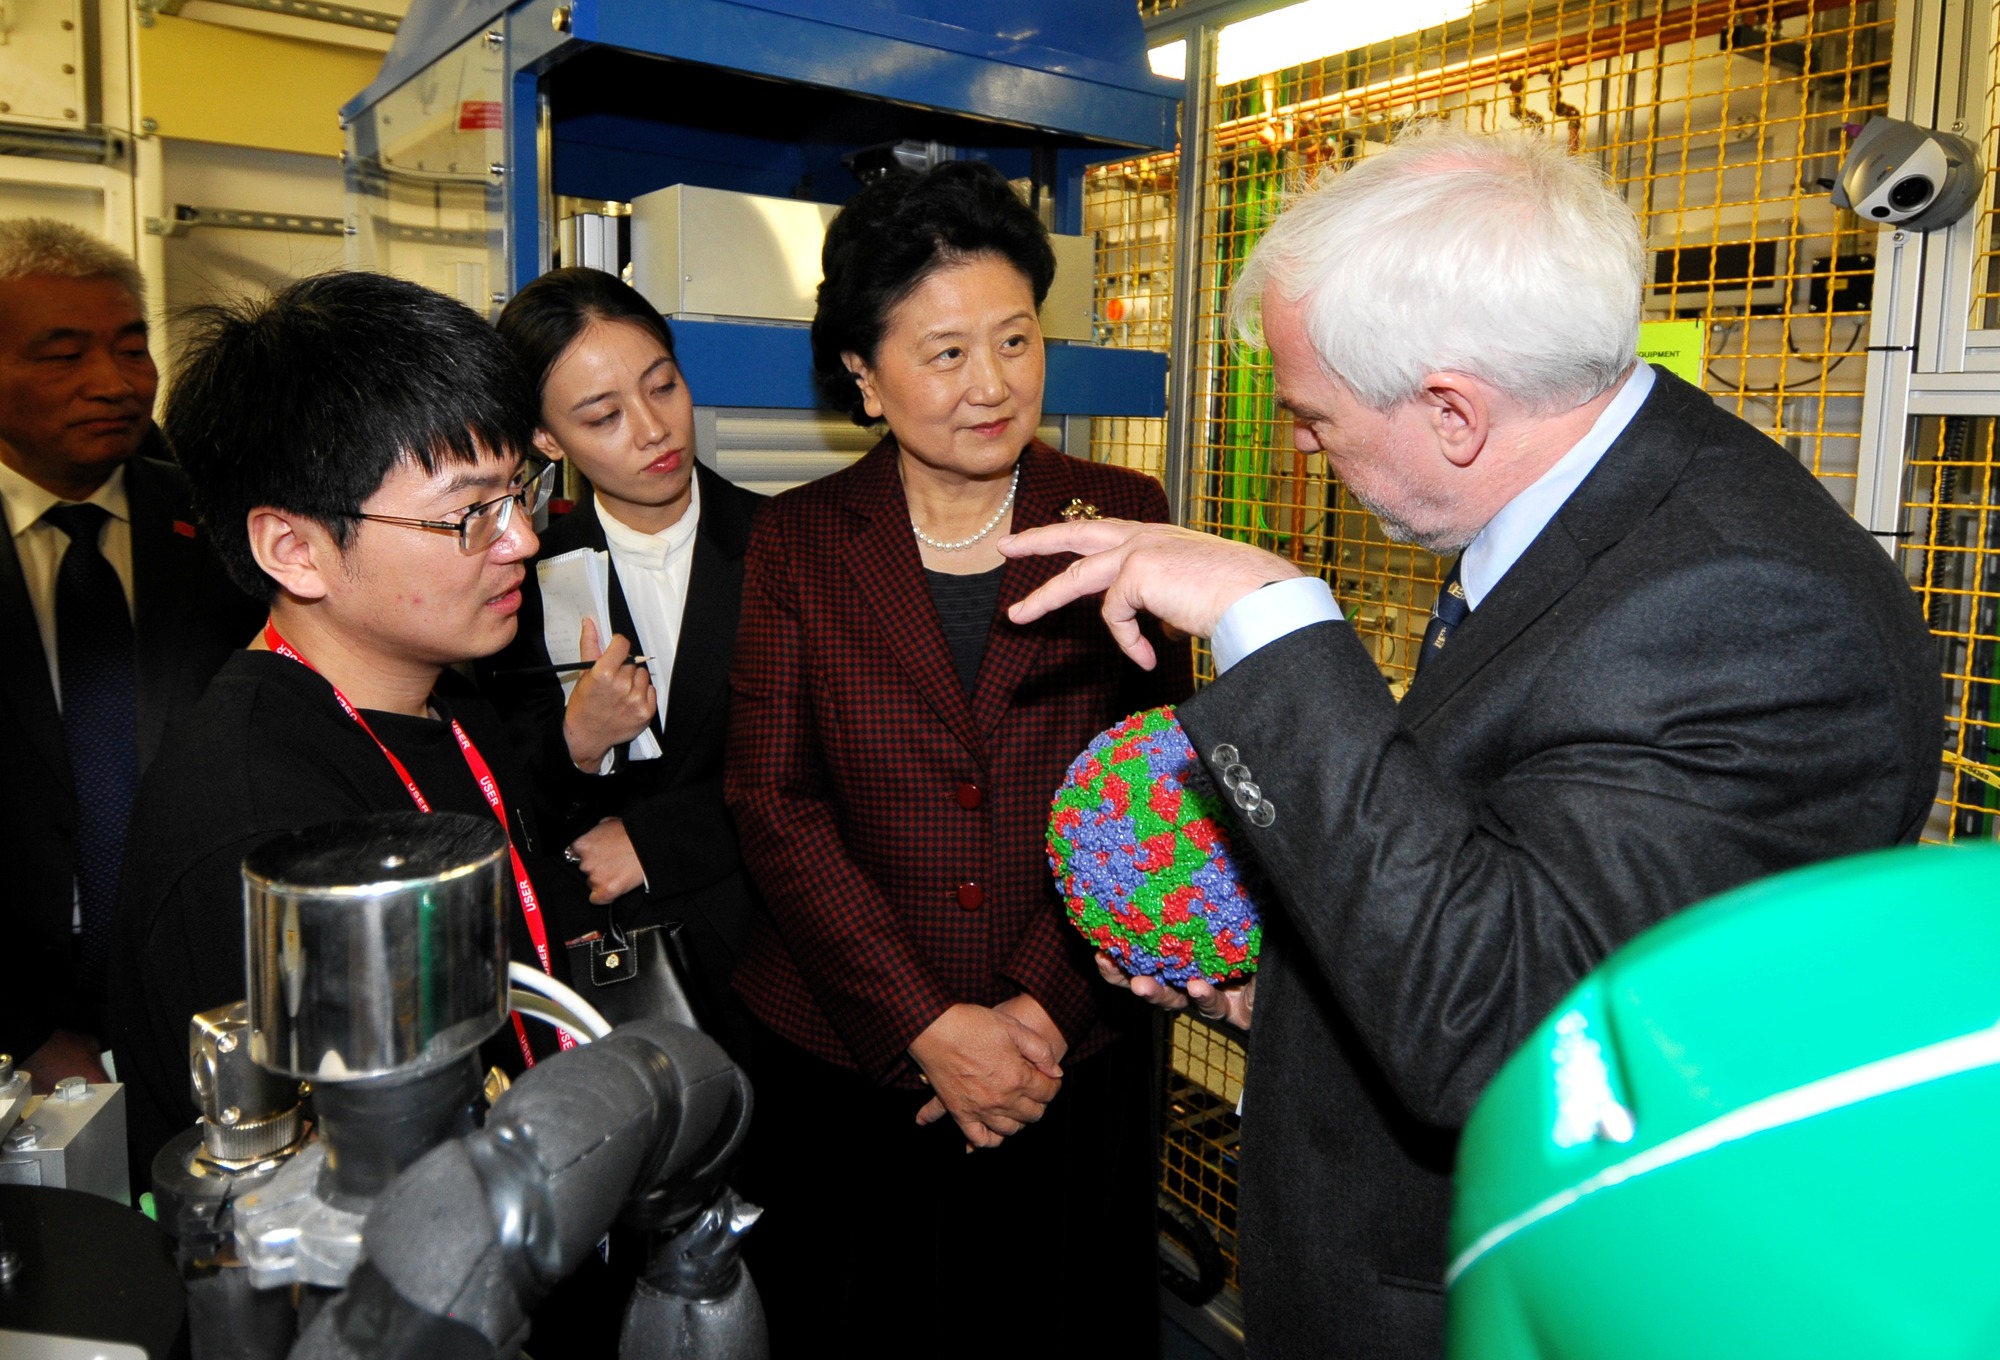 Madame Liu was shown Diamond’s I24 beamline for microfocus protein crystallography. Prof Dave Stuart, Diamond’s Director of Life Sciences and Head of the Division of Structural Biology at the Department of Clinical Medicine (Oxford) and Ling Zhu and Xlangxi Wang